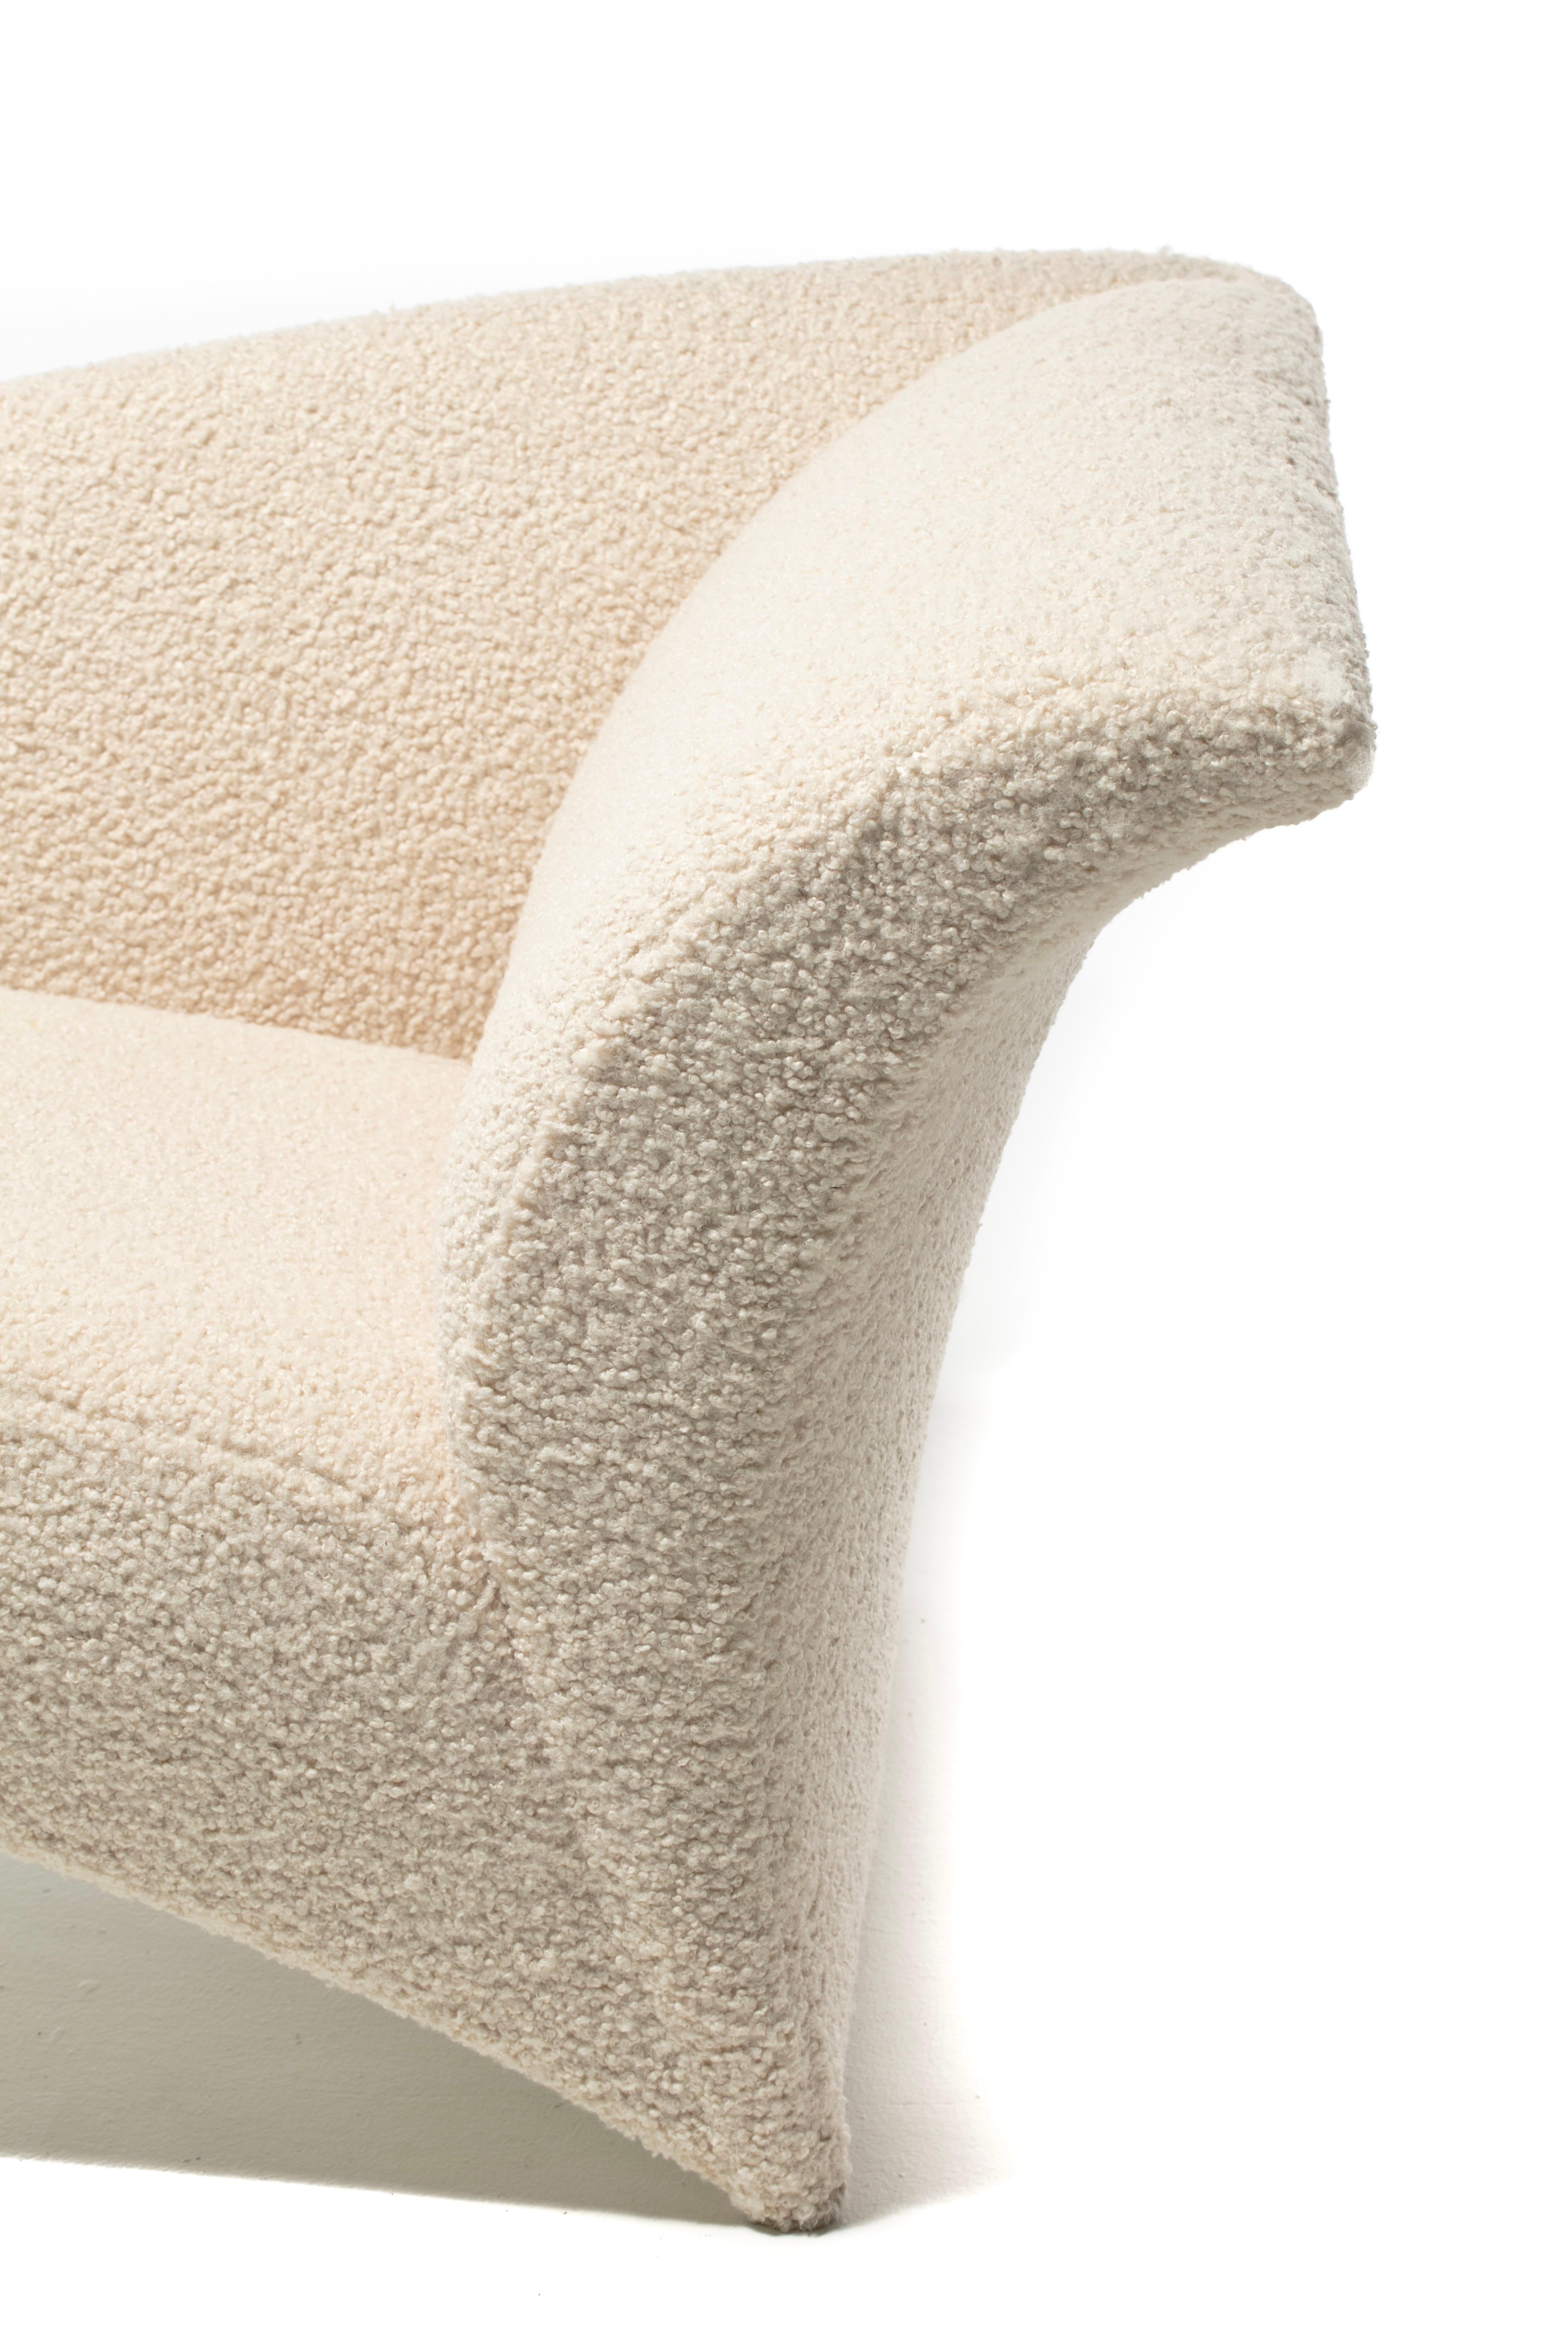 Vladimir Kagan Post Modern Marilyn Chaise Lounge in Ivory White Bouclé c. 1986 For Sale 5